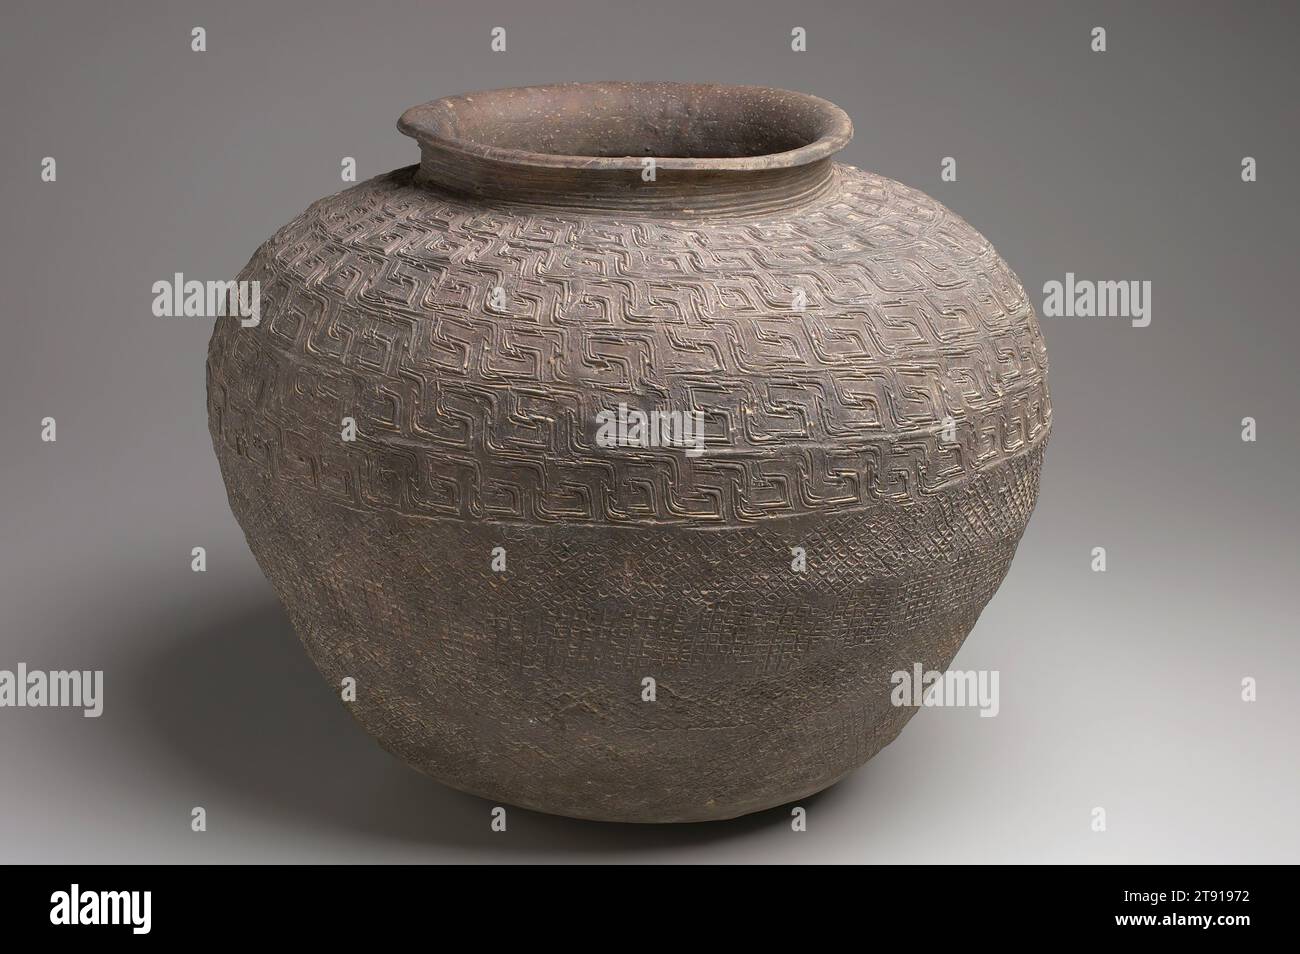 Storage Jar, 1122-772 BCE, 14 1/2 x 17 3/4 in. (36.8 x 45.09 cm), Stoneware with impressed decor, China, 12th-8th century BCE, This handbuilt vessel has been stamped with a wave pattern on its upper half and the lower half with a woven stamped pattern. The raised patterns create a greater amount of surface area on the exterior of the pot which in earthenware can cool the contents. This jar is made of stoneware which does not allow saturation of the clay body and thus no cooling occurs. A new technology at the time, high-fired stoneware is much more durable and thus the vessel will last longer Stock Photo